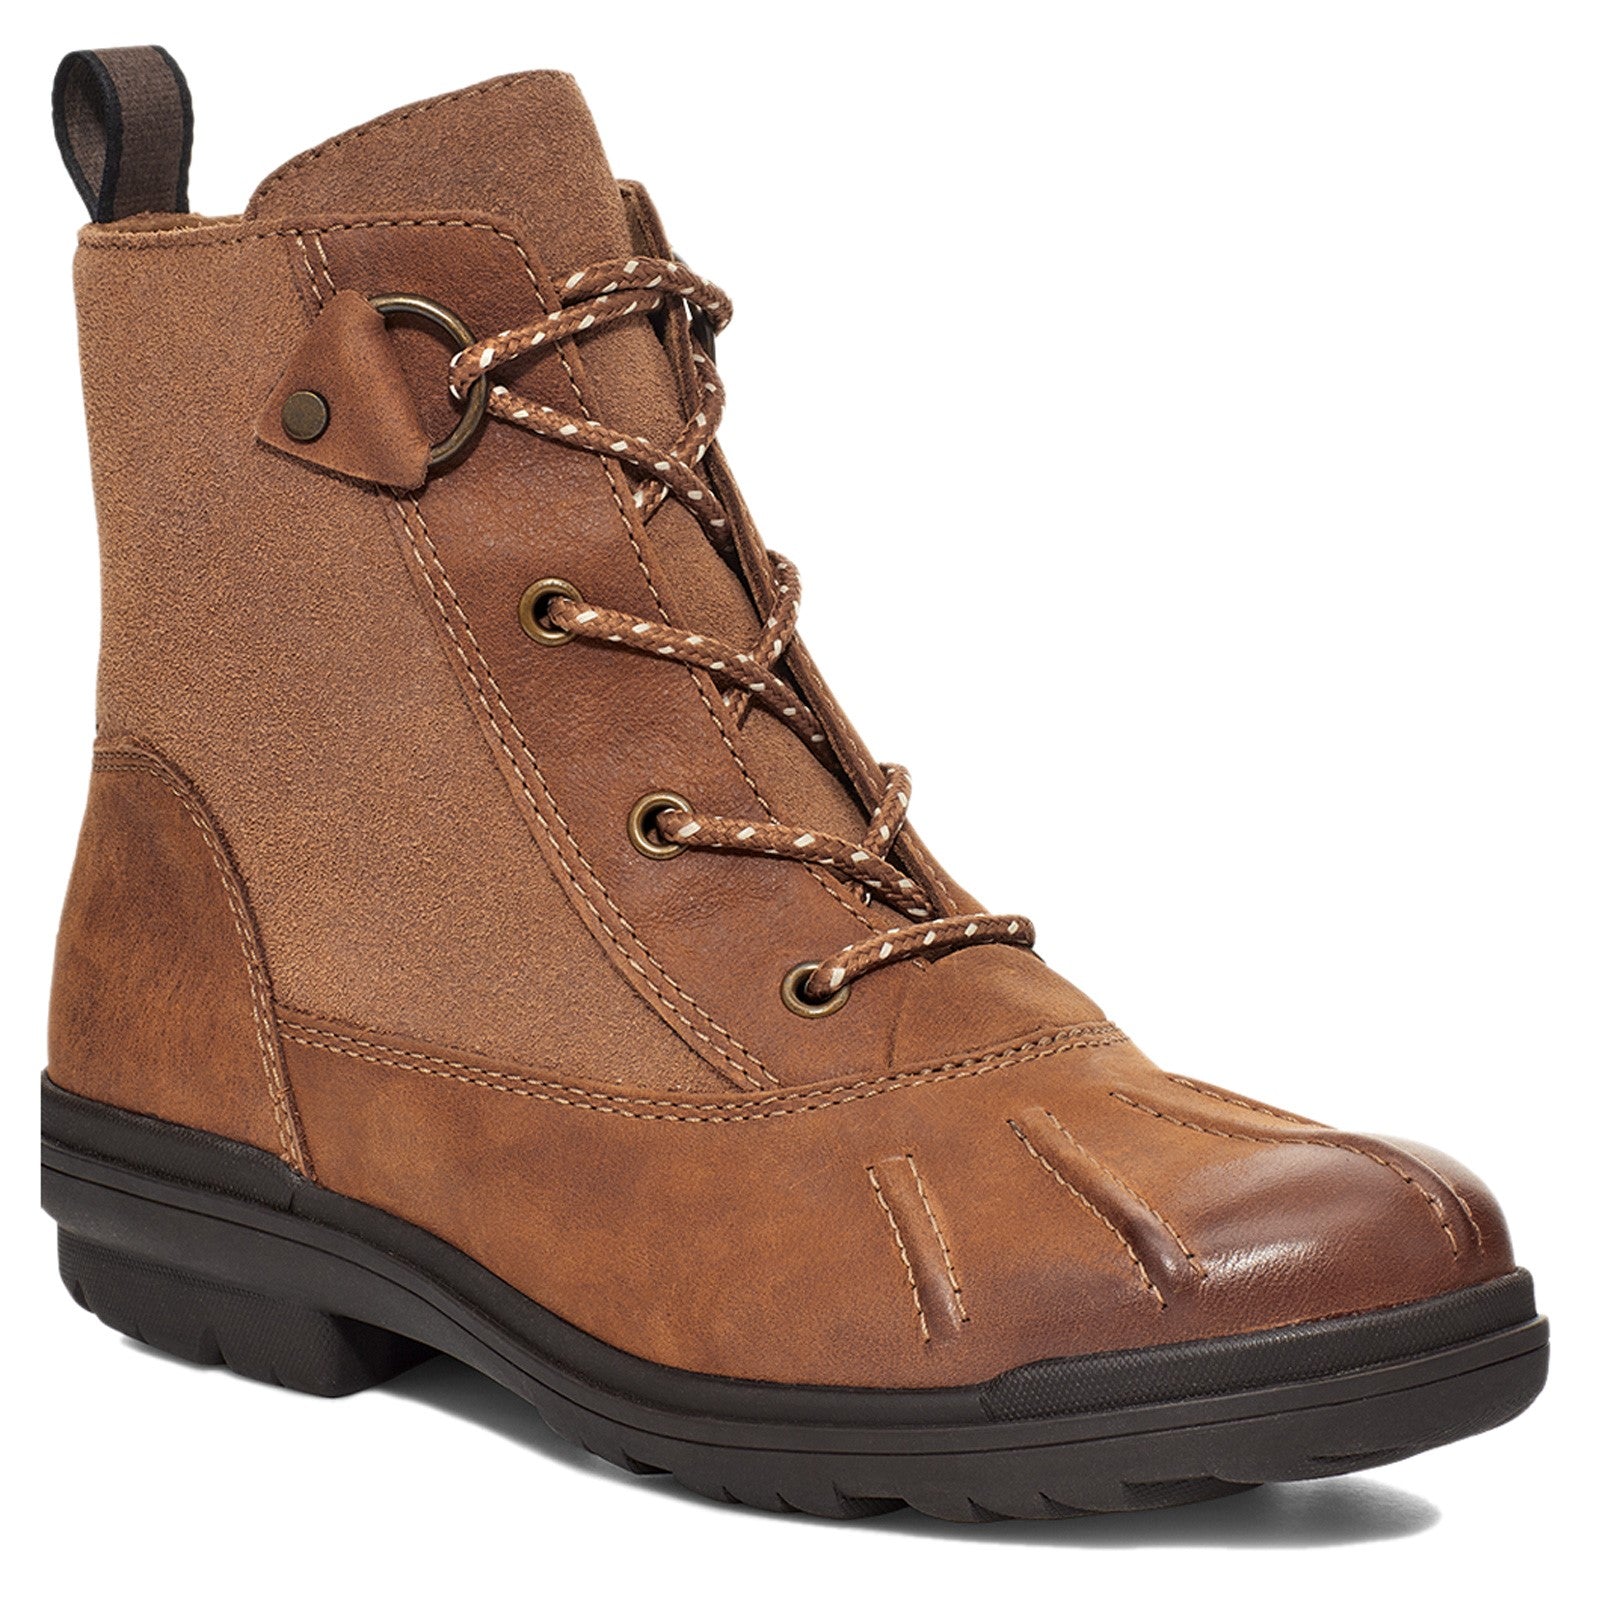 Ugg Romely Heritage Lace Boot Women's- Chestnut